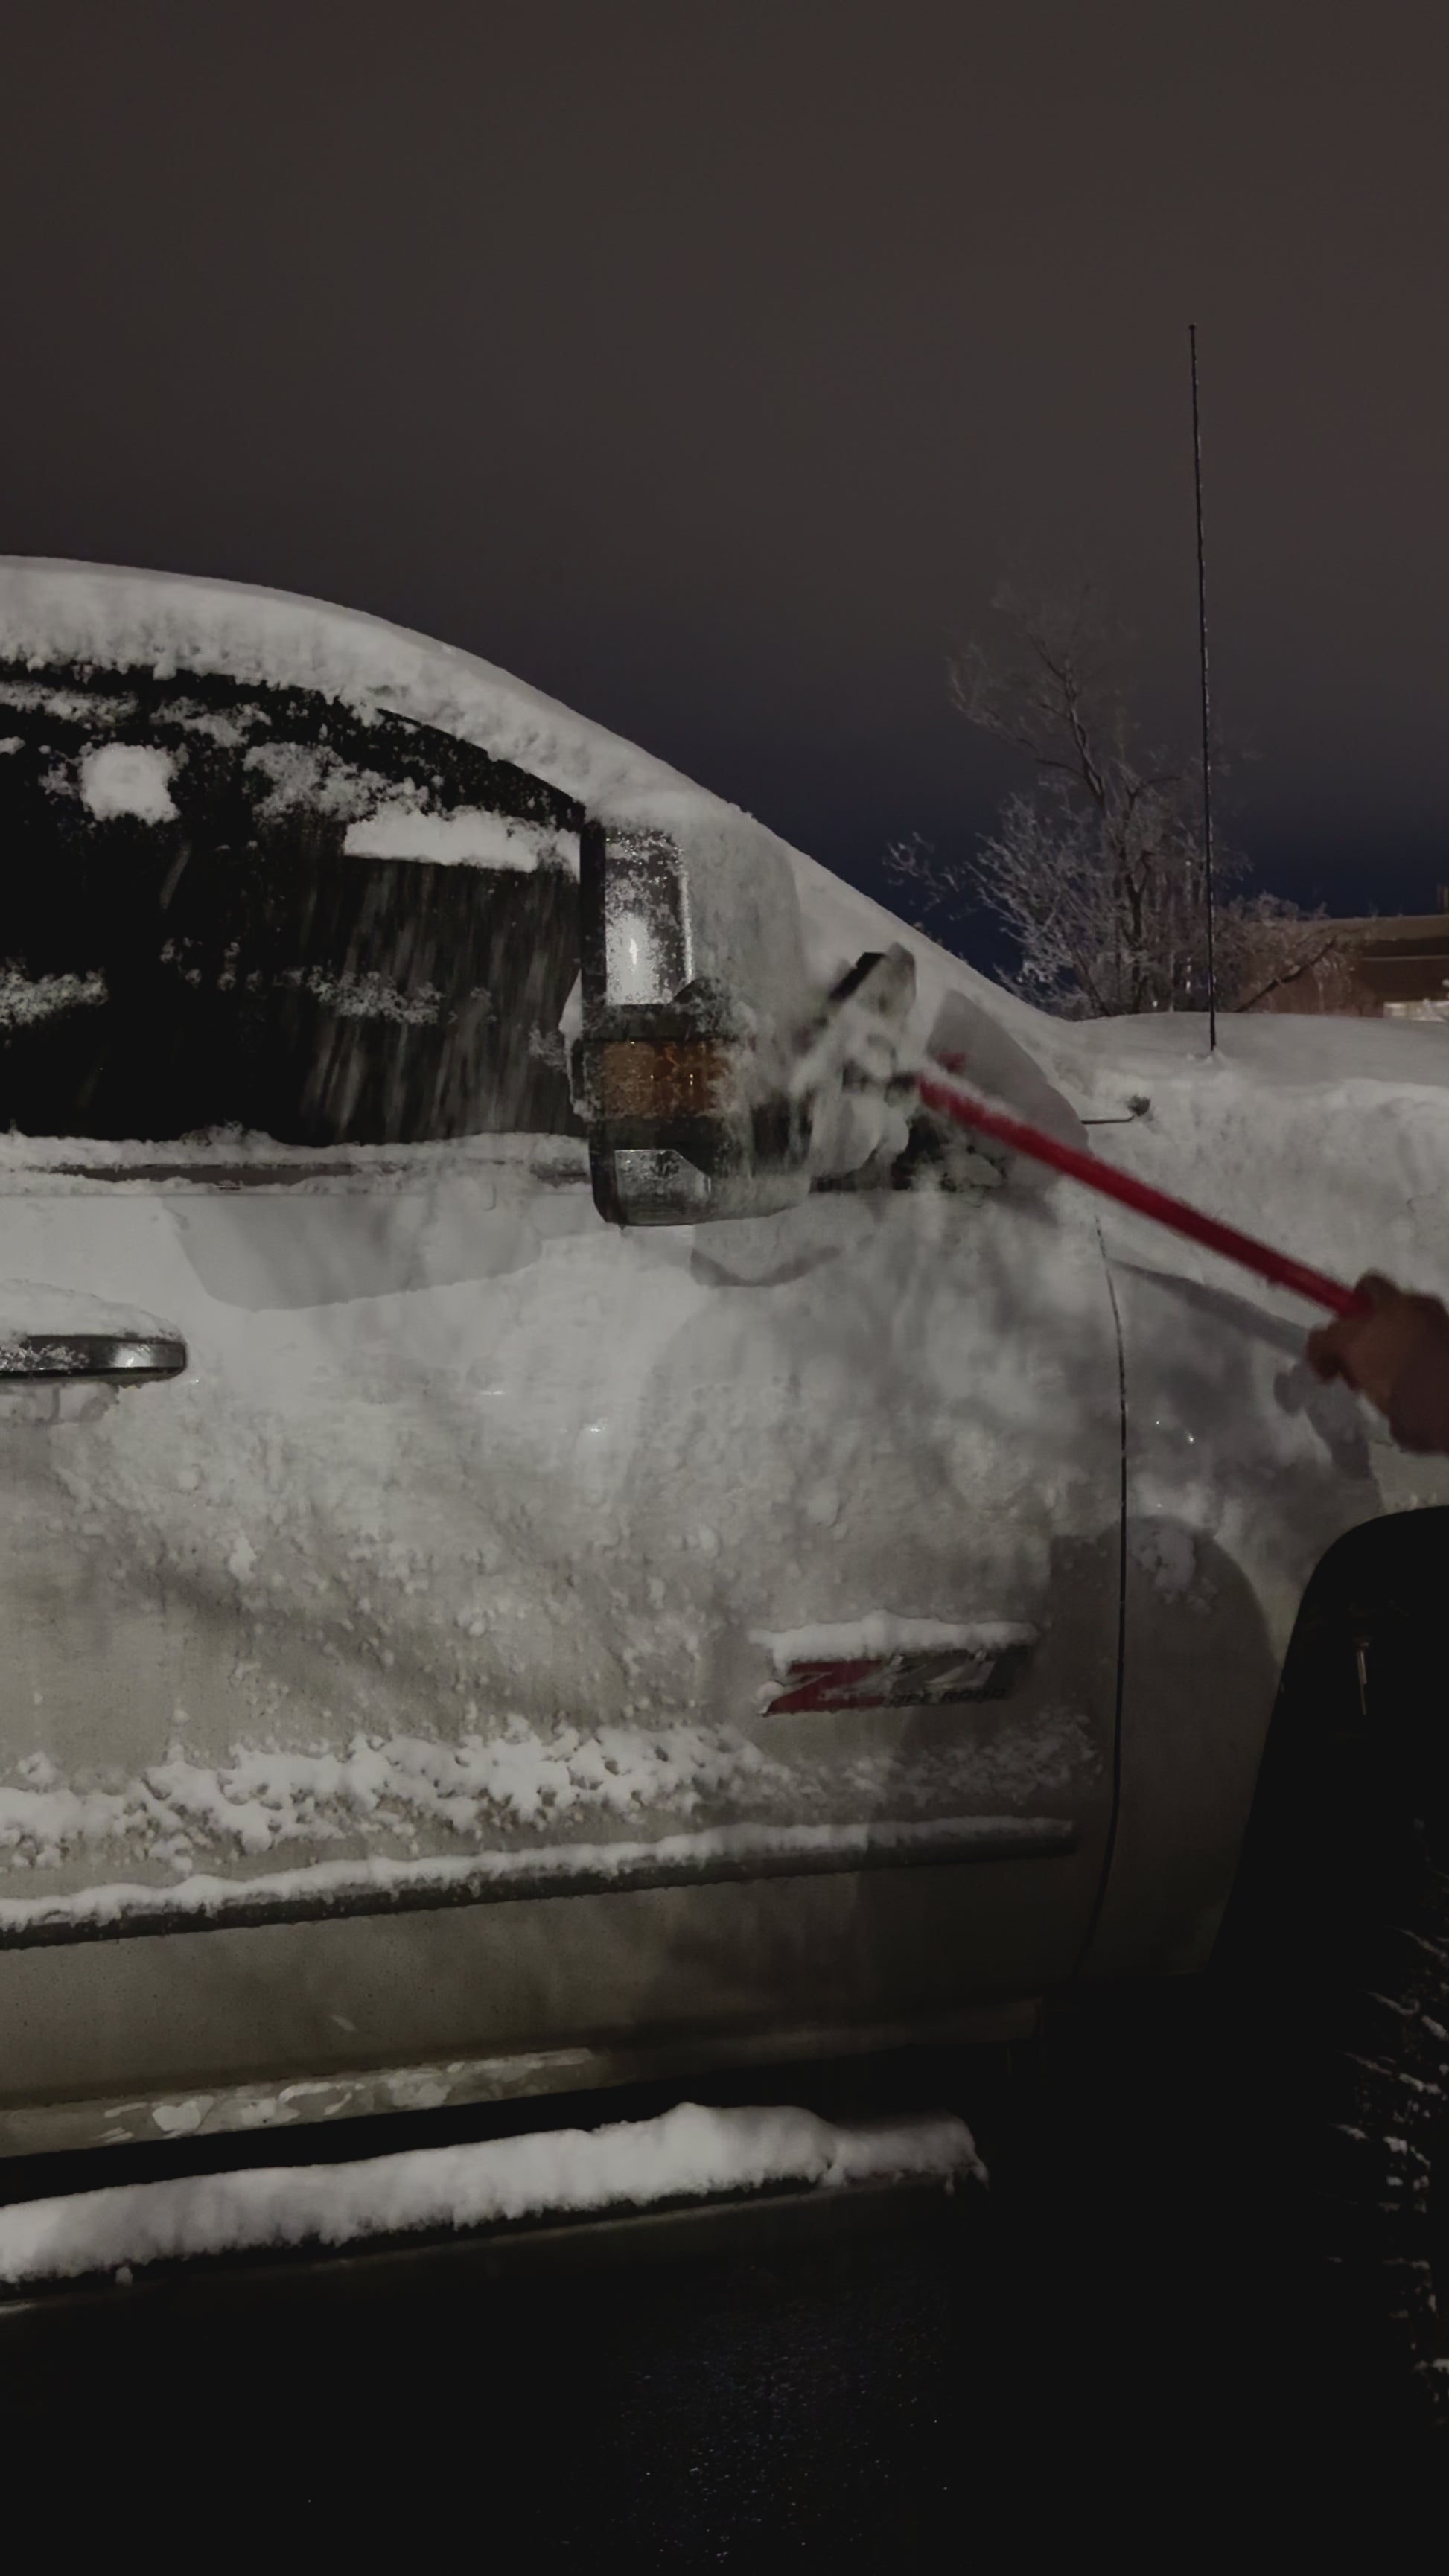 Video showing real-life example of using Forever Broom to remove snow and ice from truck windshield, windows, and doors after fresh snowfall in Utah.